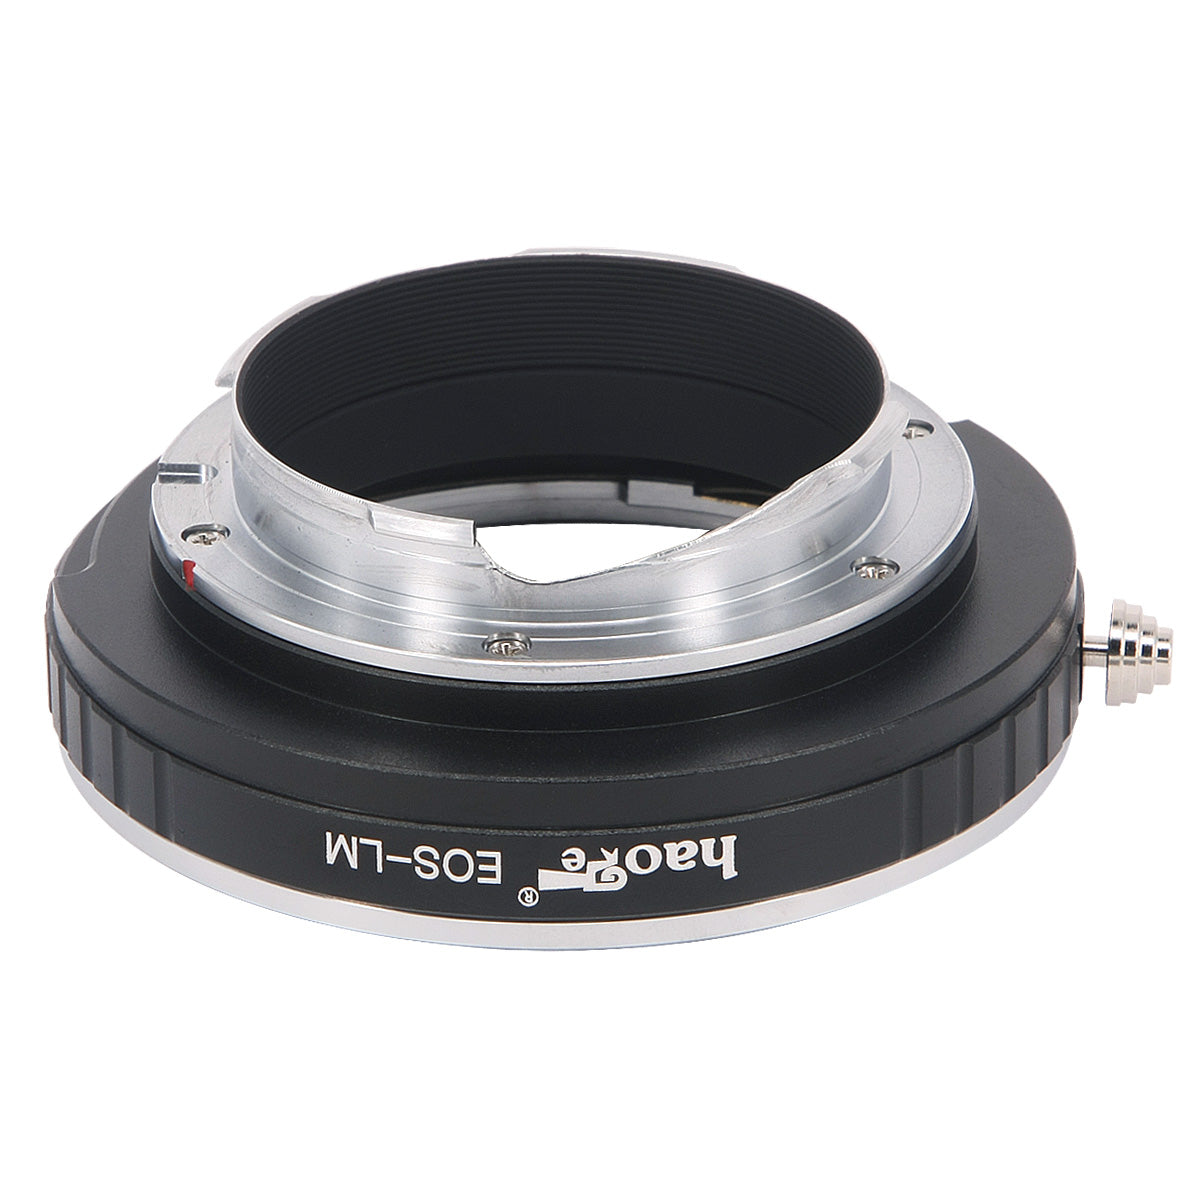 Haoge Lens Mount Adapter for Canon EOS EF Lens to Leica M-mount Camera such as M240, M240P, M262, M3, M2, M1, M4, M5, CL, M6, MP, M7, M8, M9, M9-P, M Monochrom, M-E, M, M-P, M10, M-A